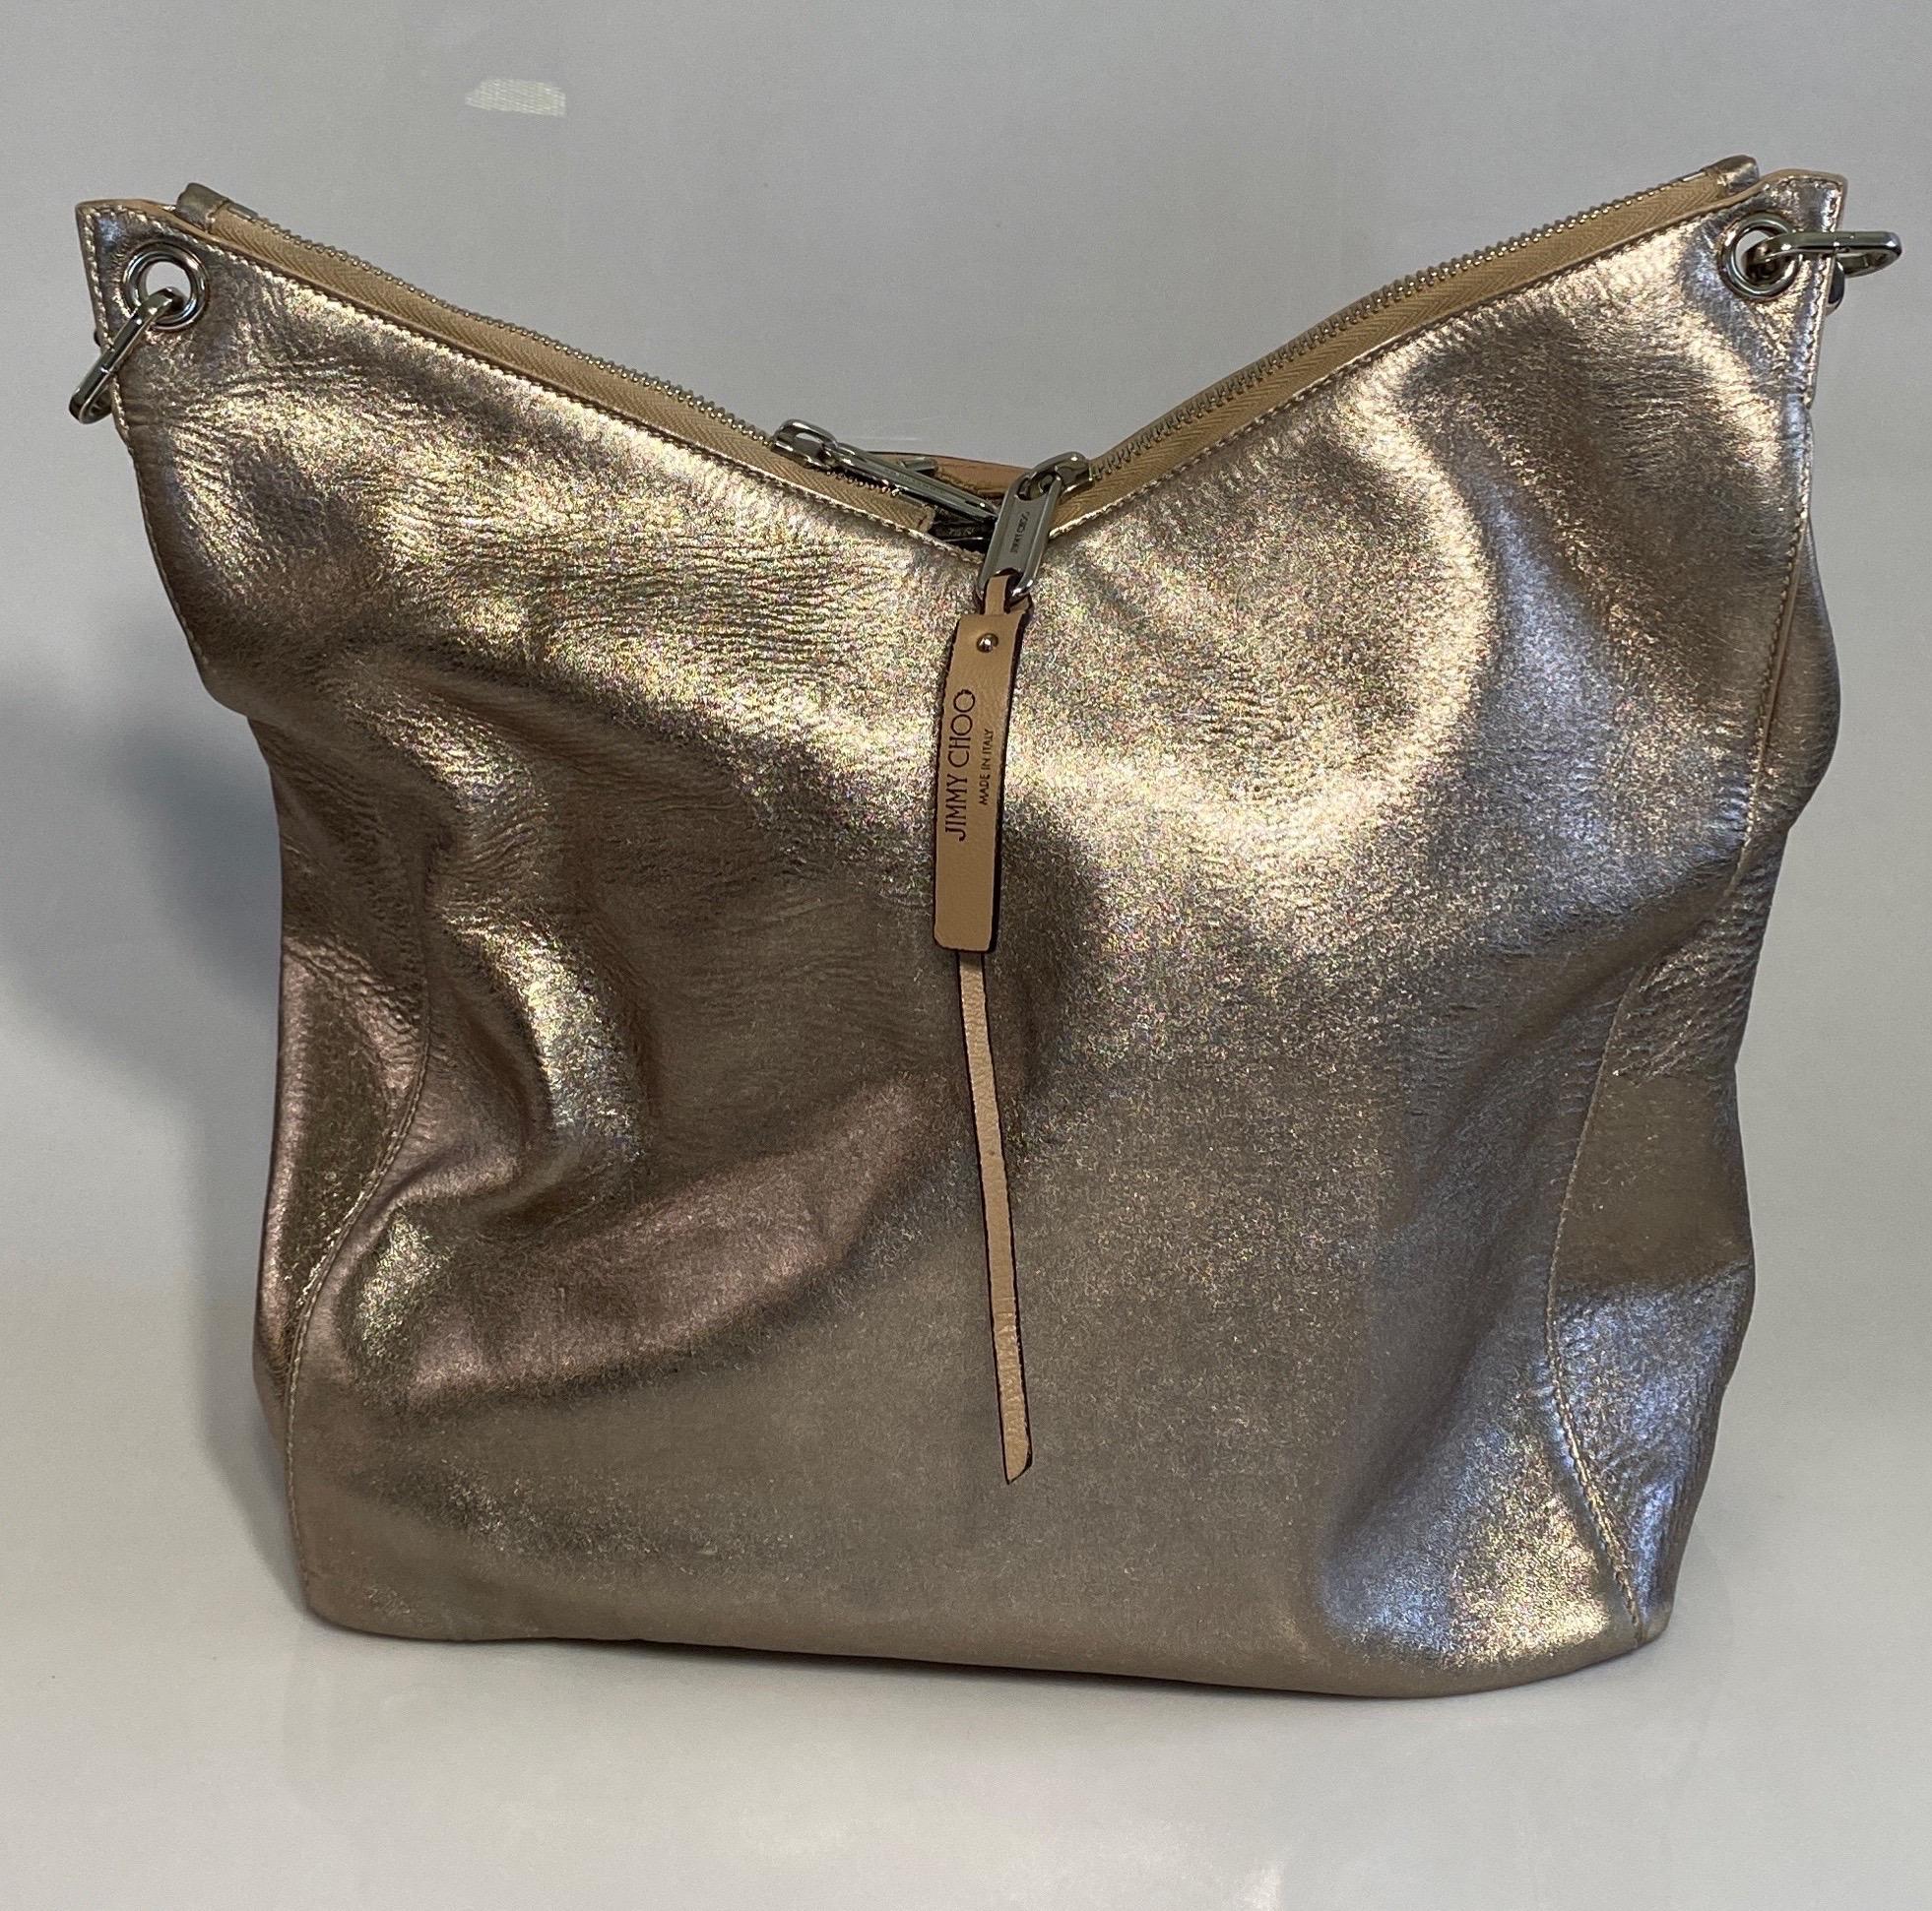 Jimmy Choo Metallic Large Hobo Tote In Good Condition For Sale In West Palm Beach, FL